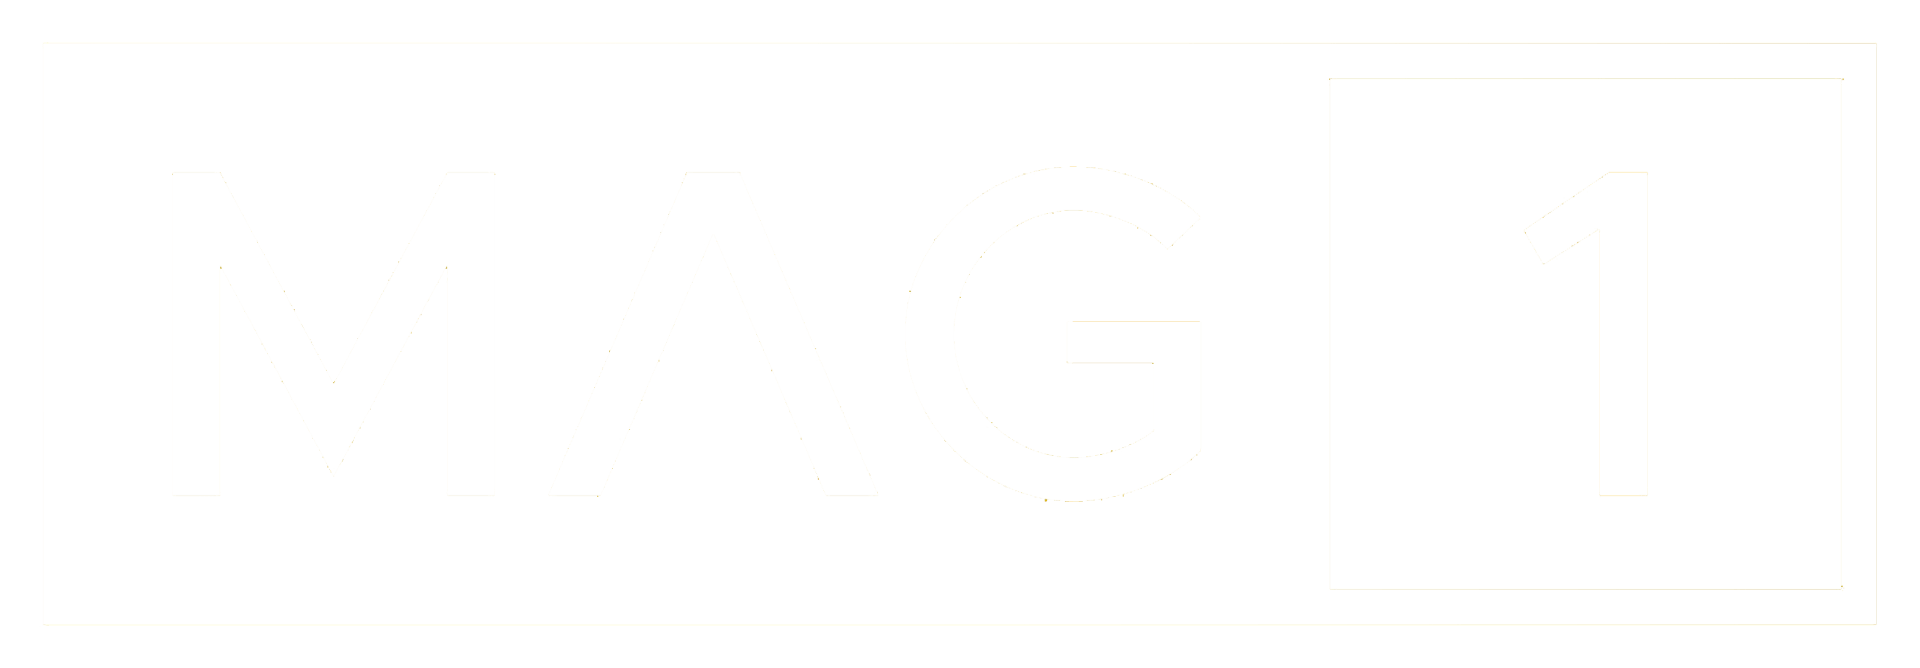 Mag1 Logo in Footer - linked to Home page